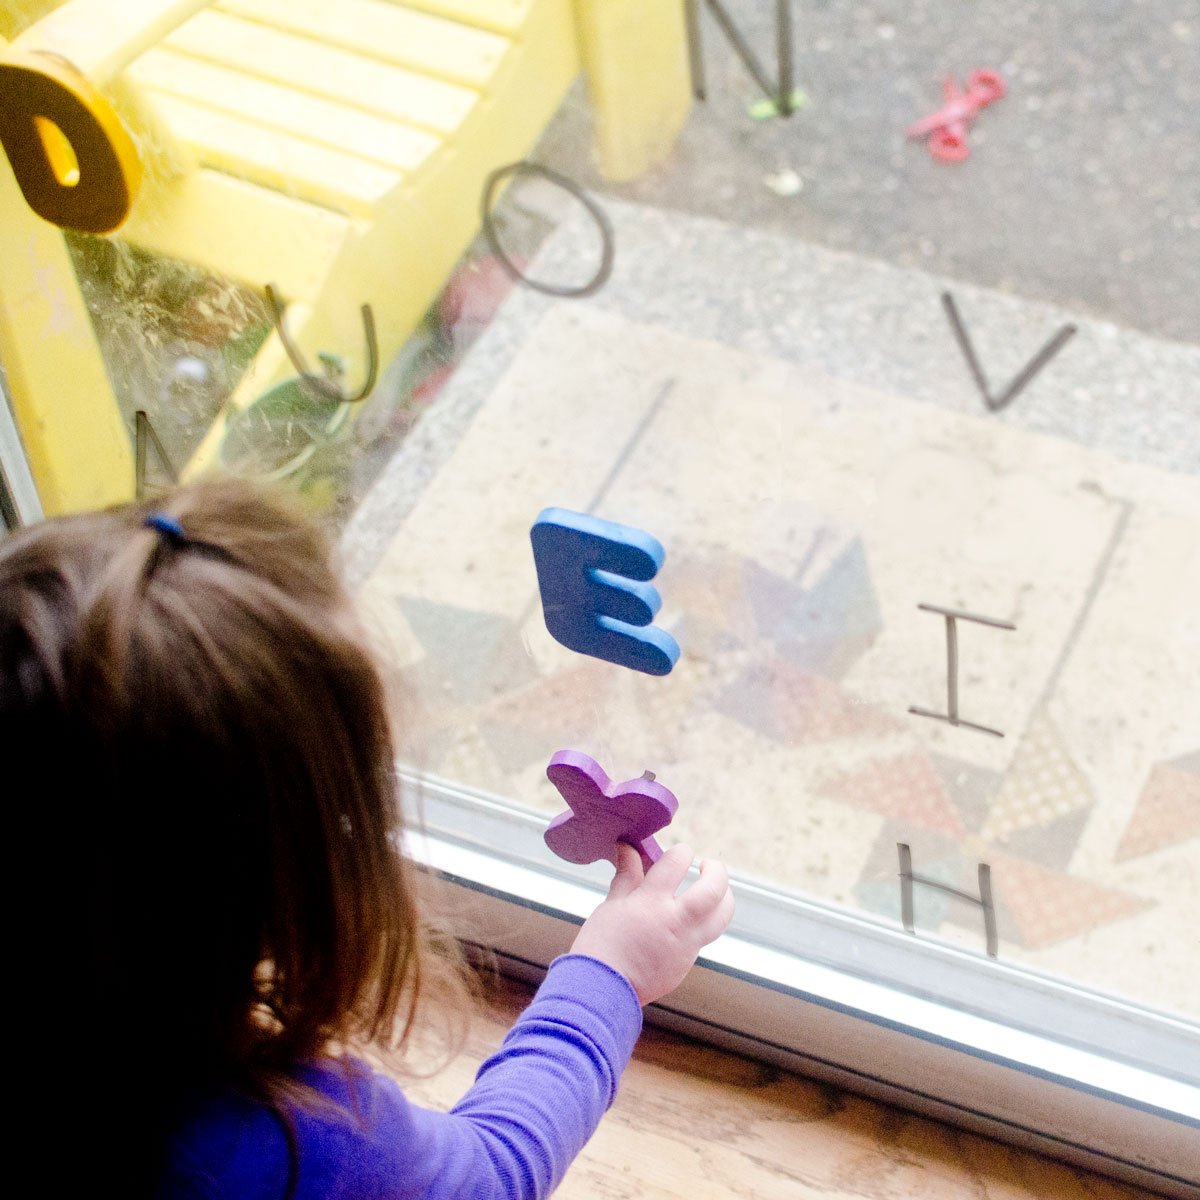 A child reaches for a purple letter X stuck to a window. There are dry erase marker letters on the glass and other foam letters stuck to it.